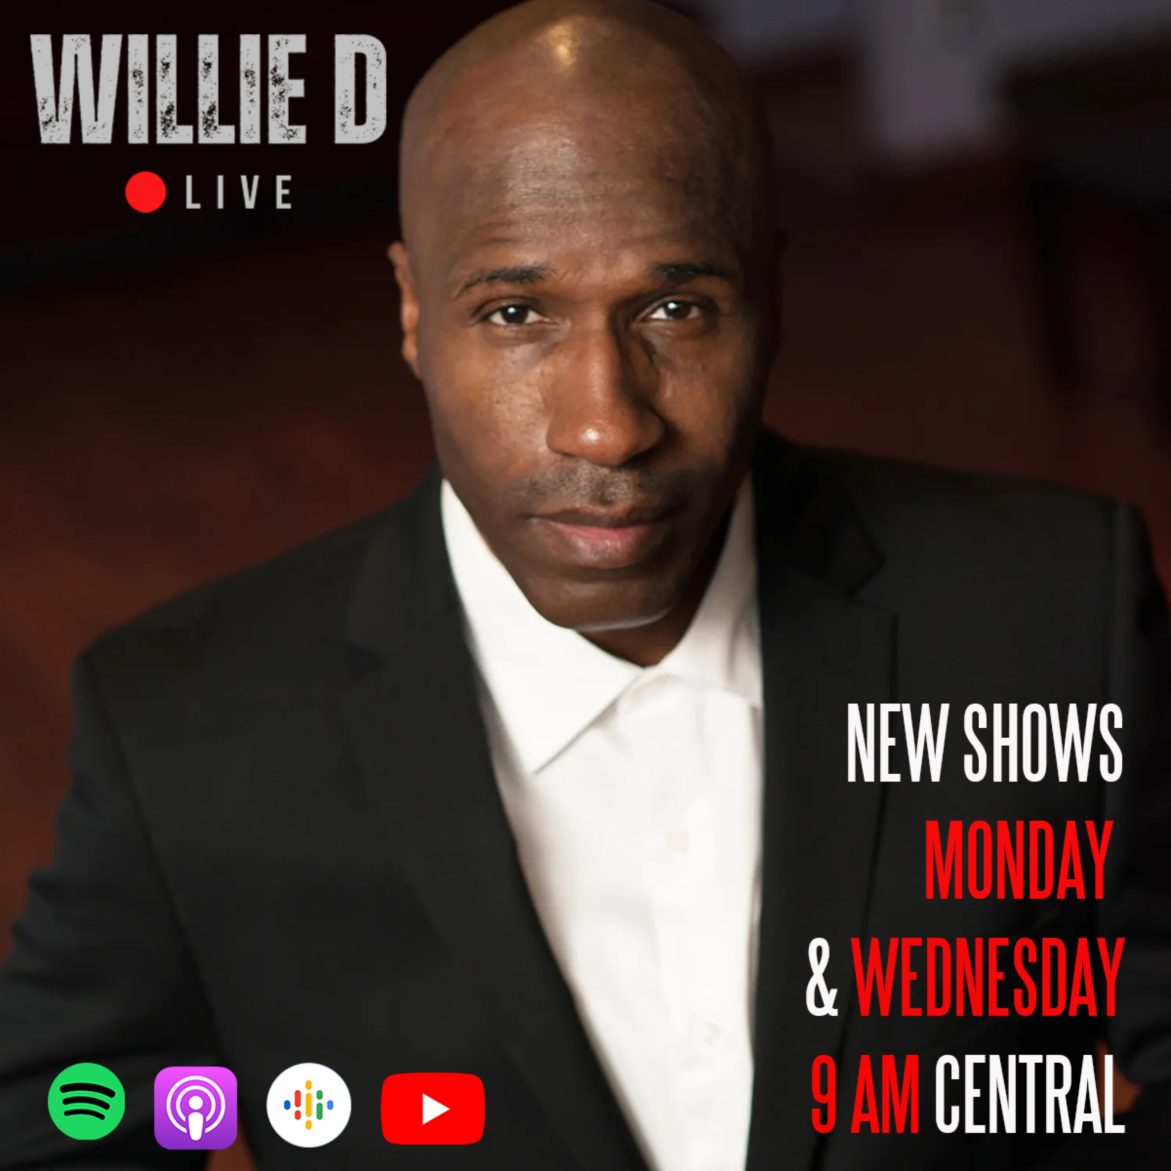 Black Podcasting - Jazz Anderson Opens Up and Shares Some Of The Most Intimate Details About Her Life On Willie D live!